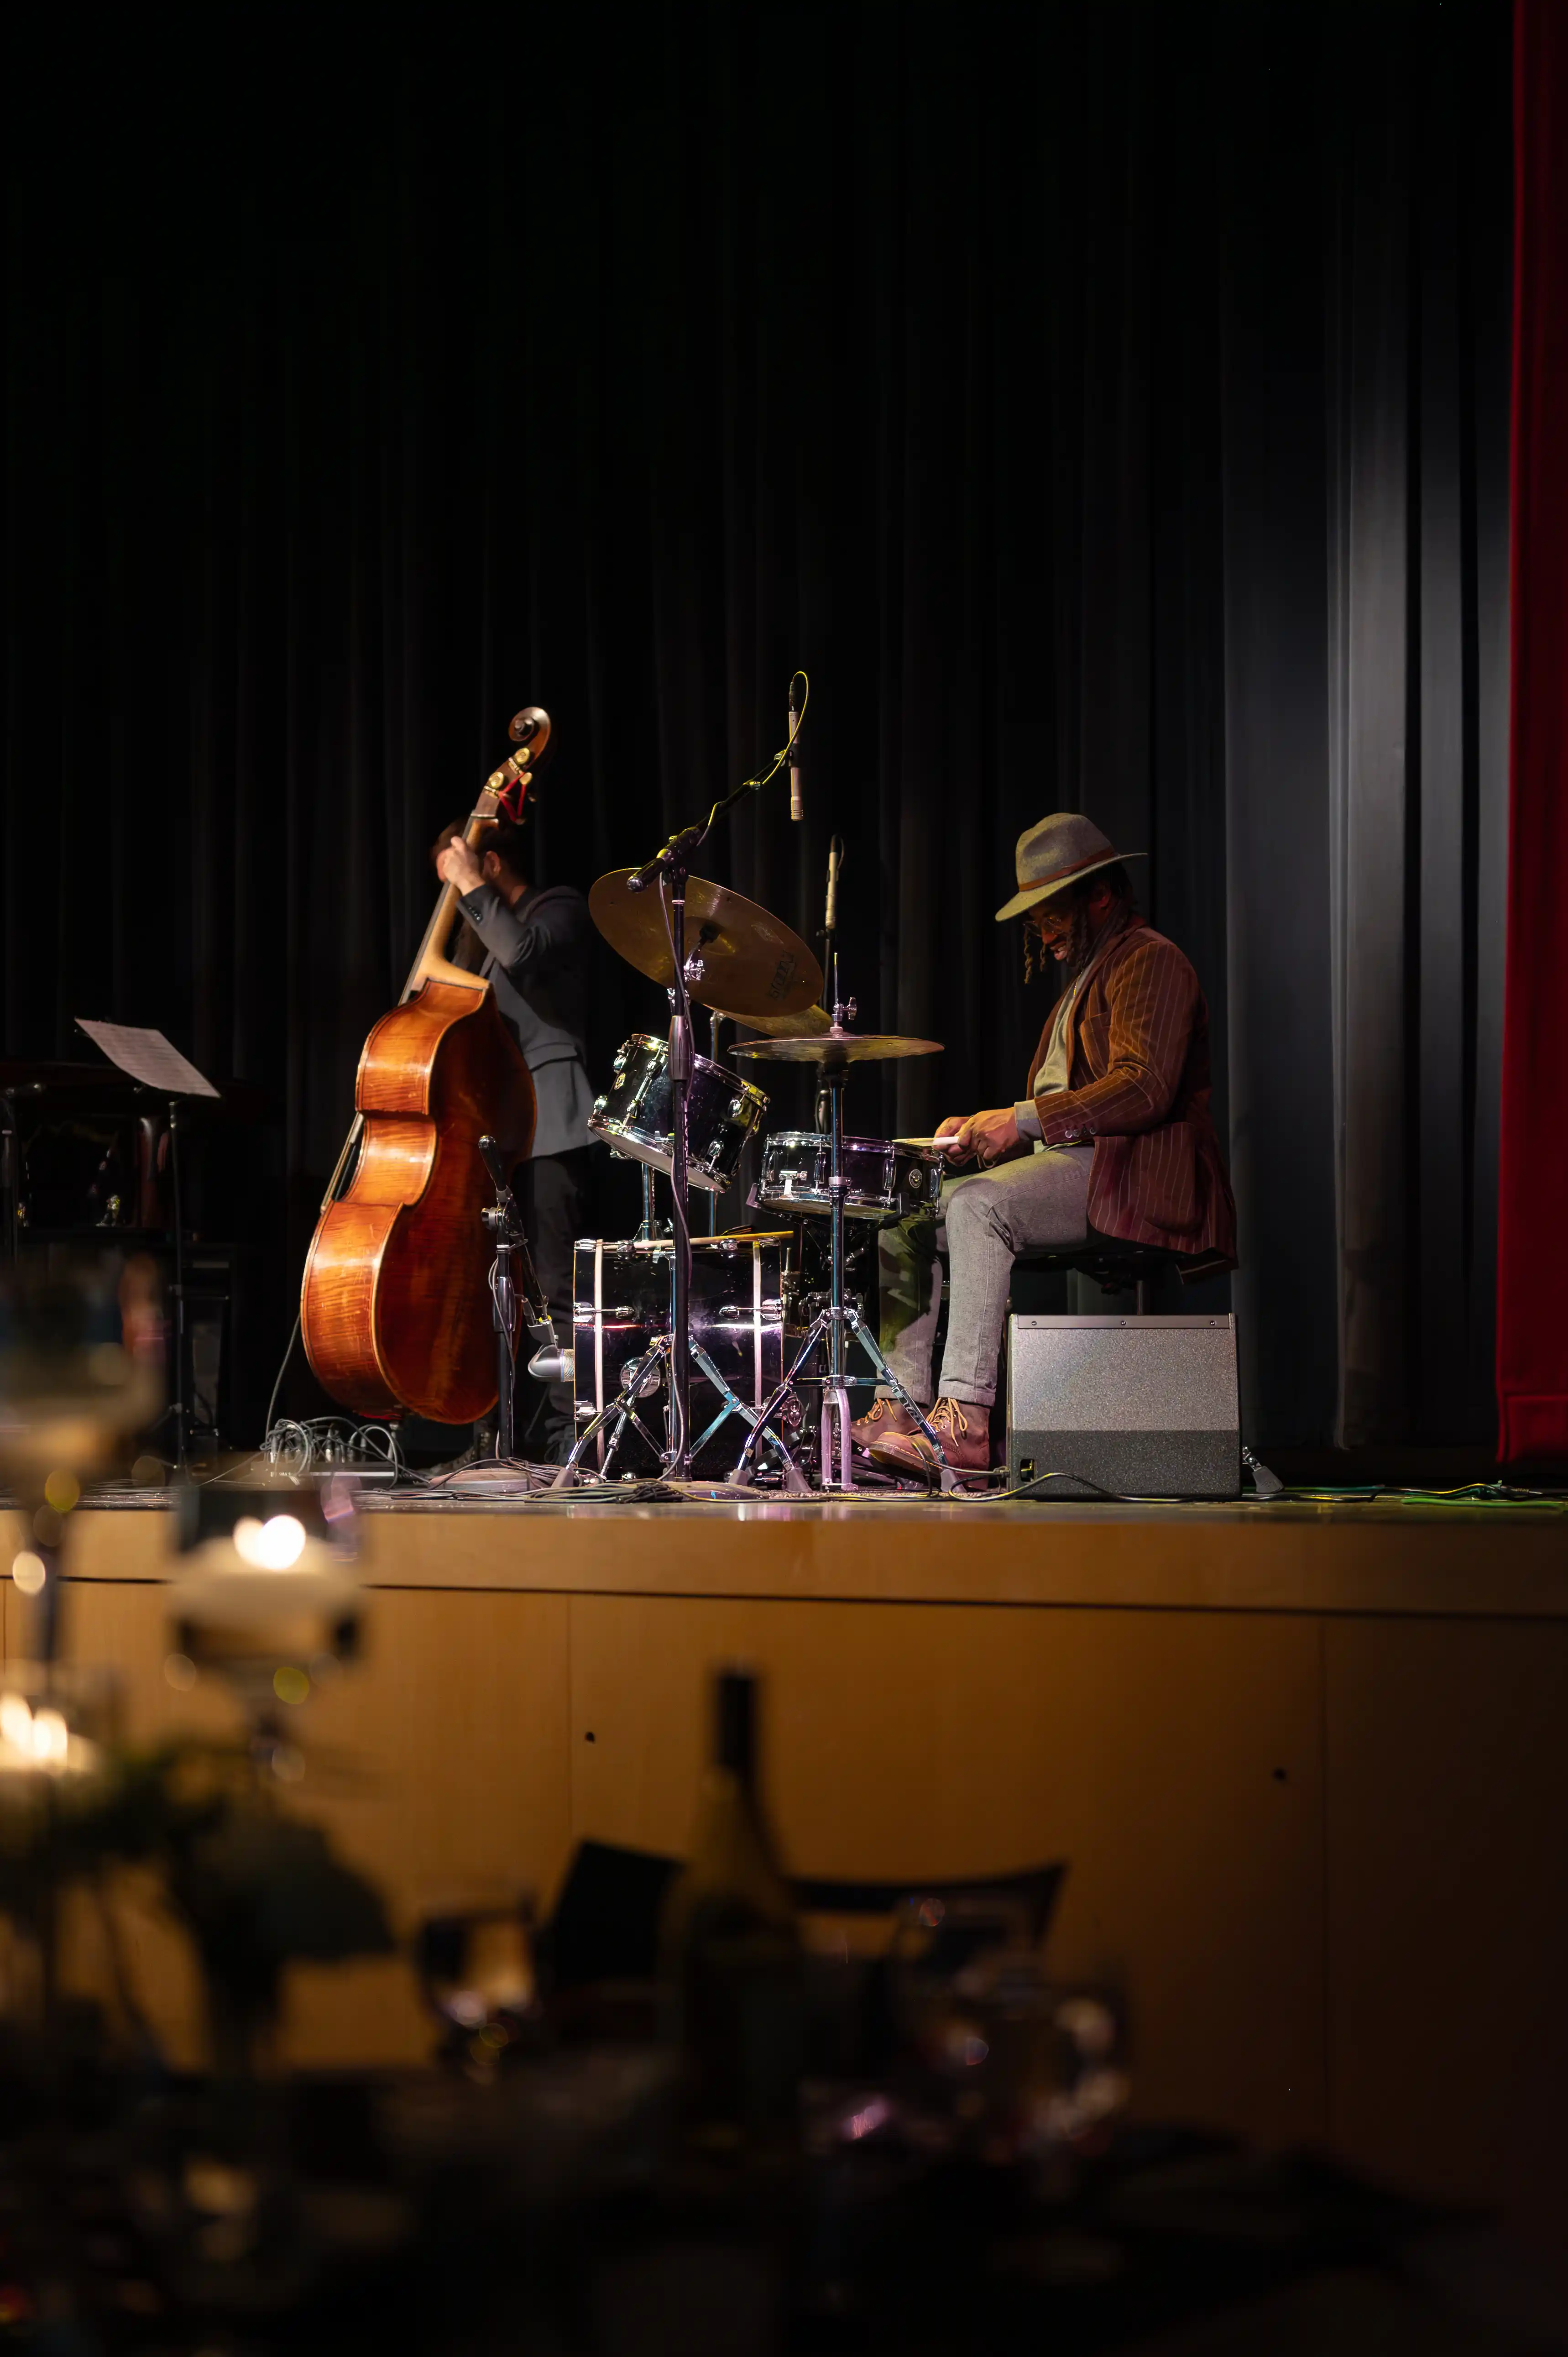 Band performing on stage with a drummer, guitarist, and a double bass player, illuminated by a spotlight.